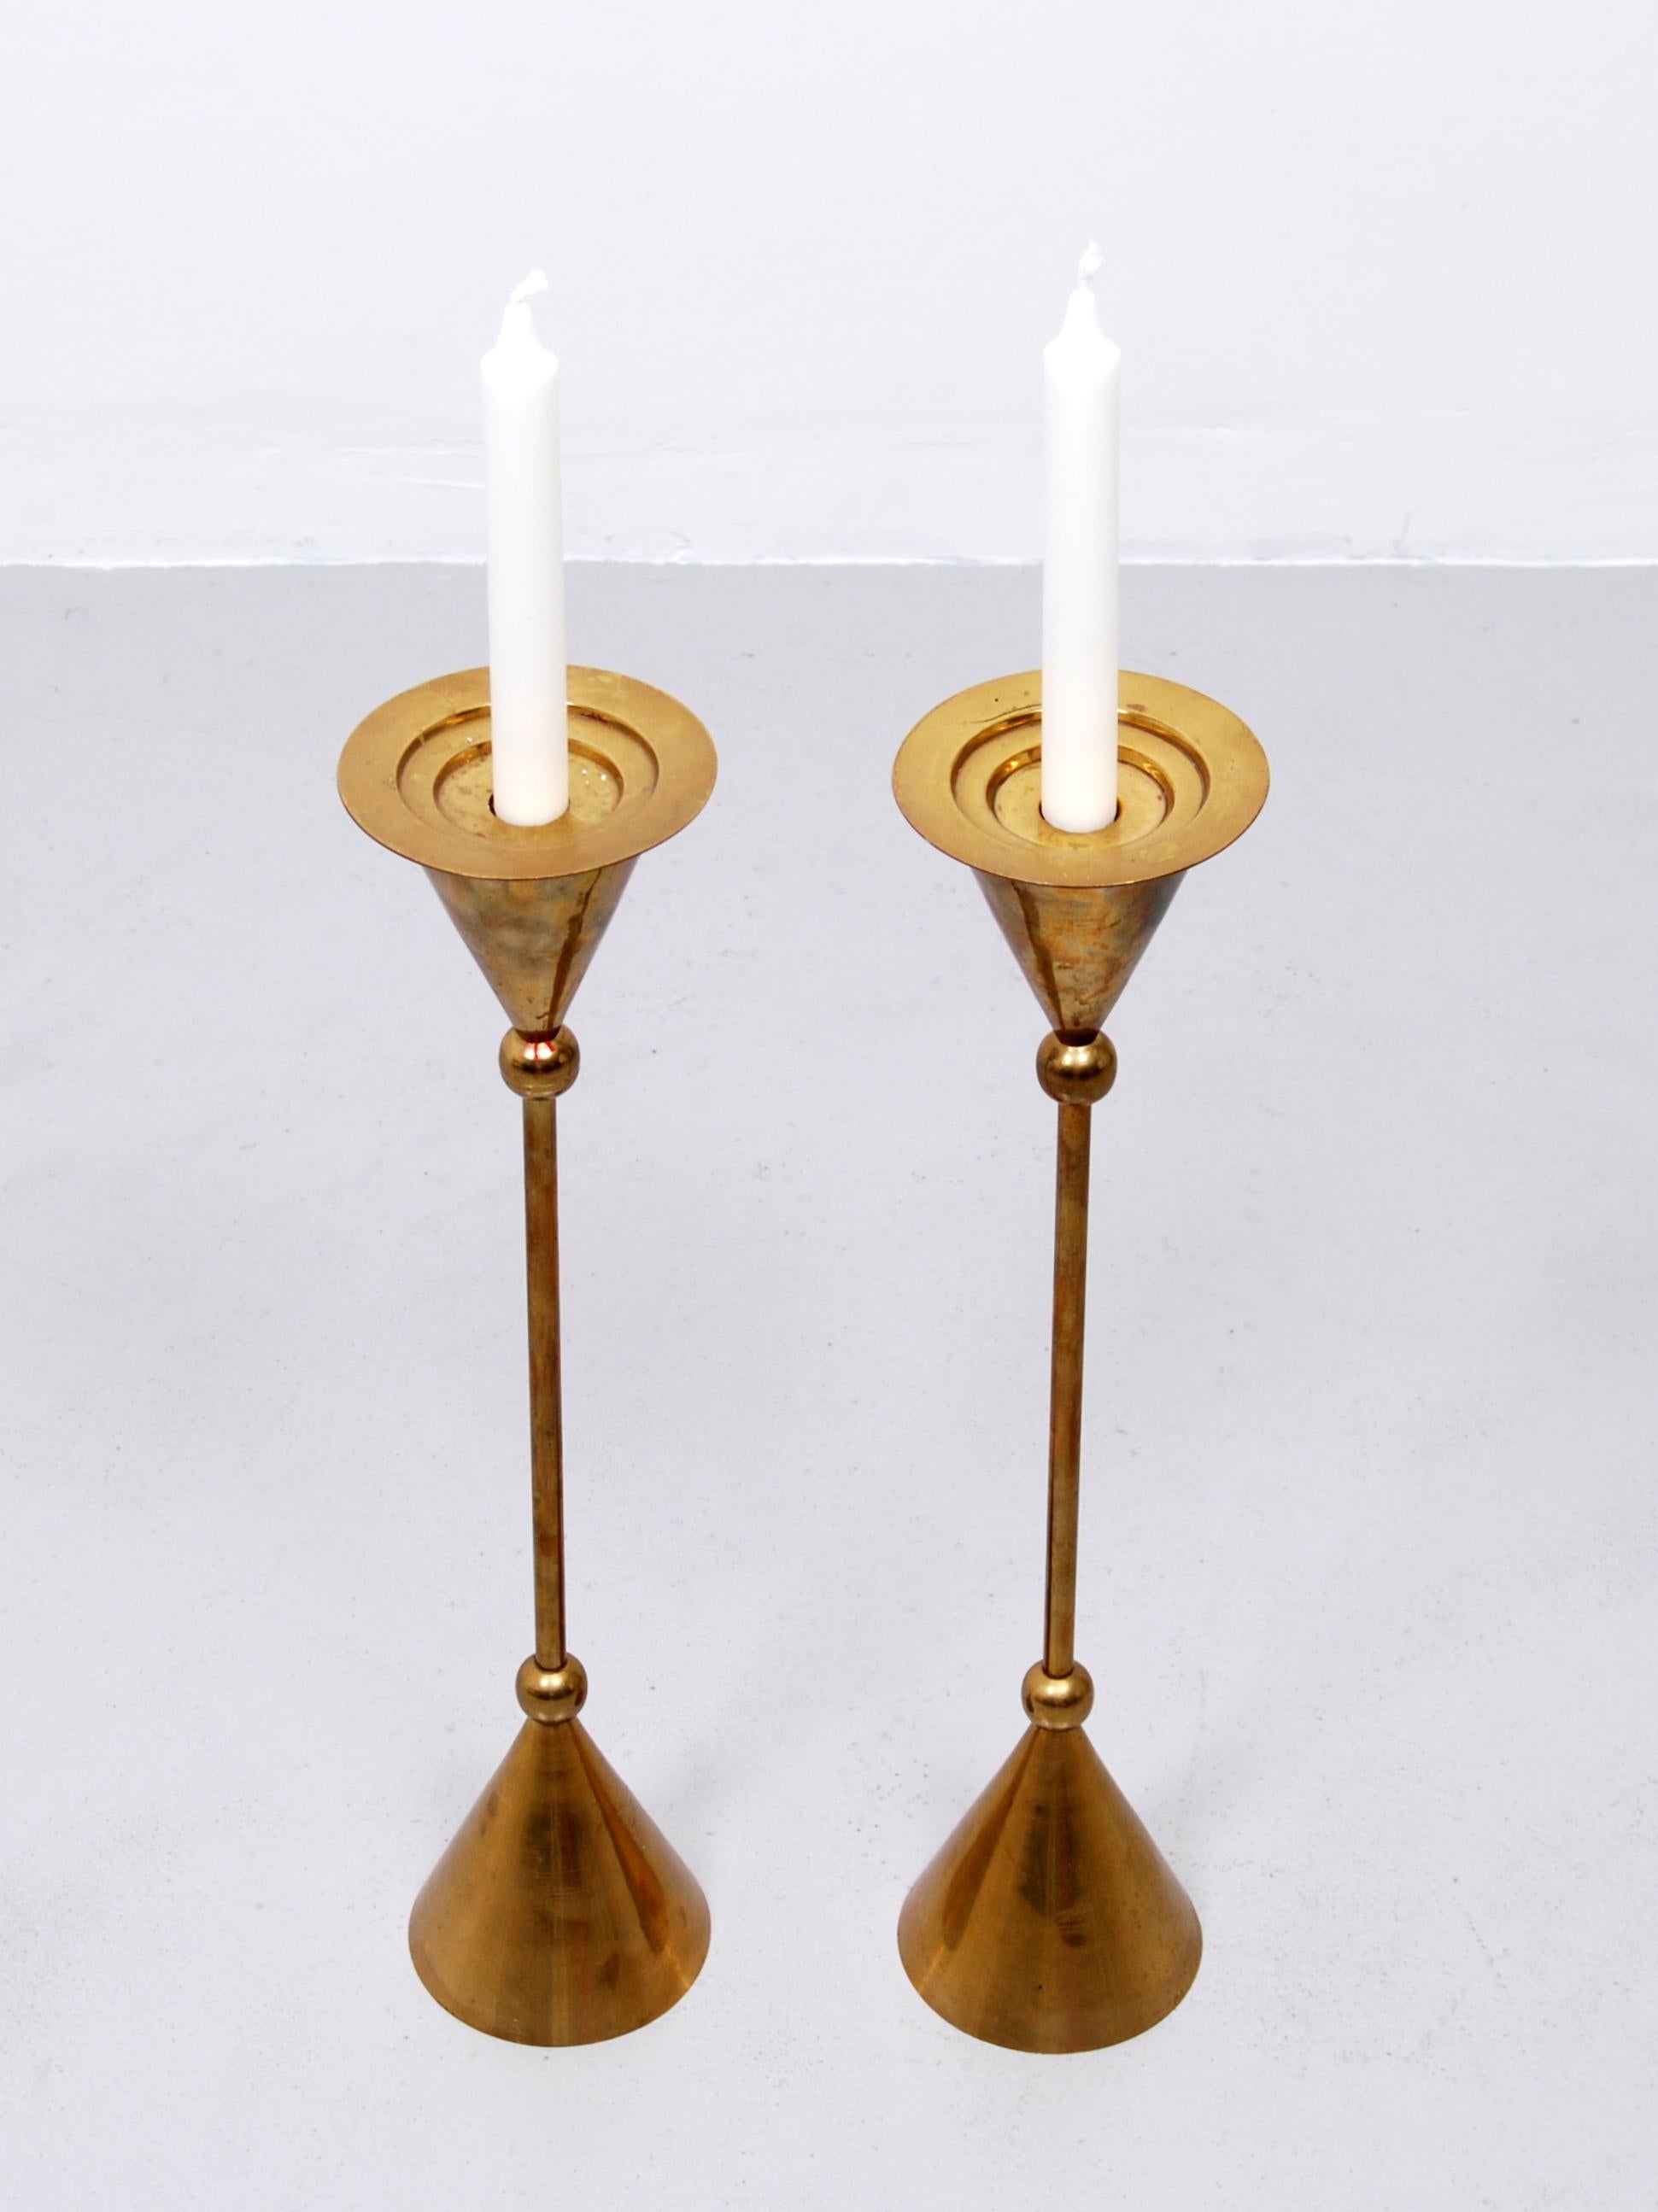 Beautiful vintage midcentury brass floor candle holders or stands with a cone and ball design.
 